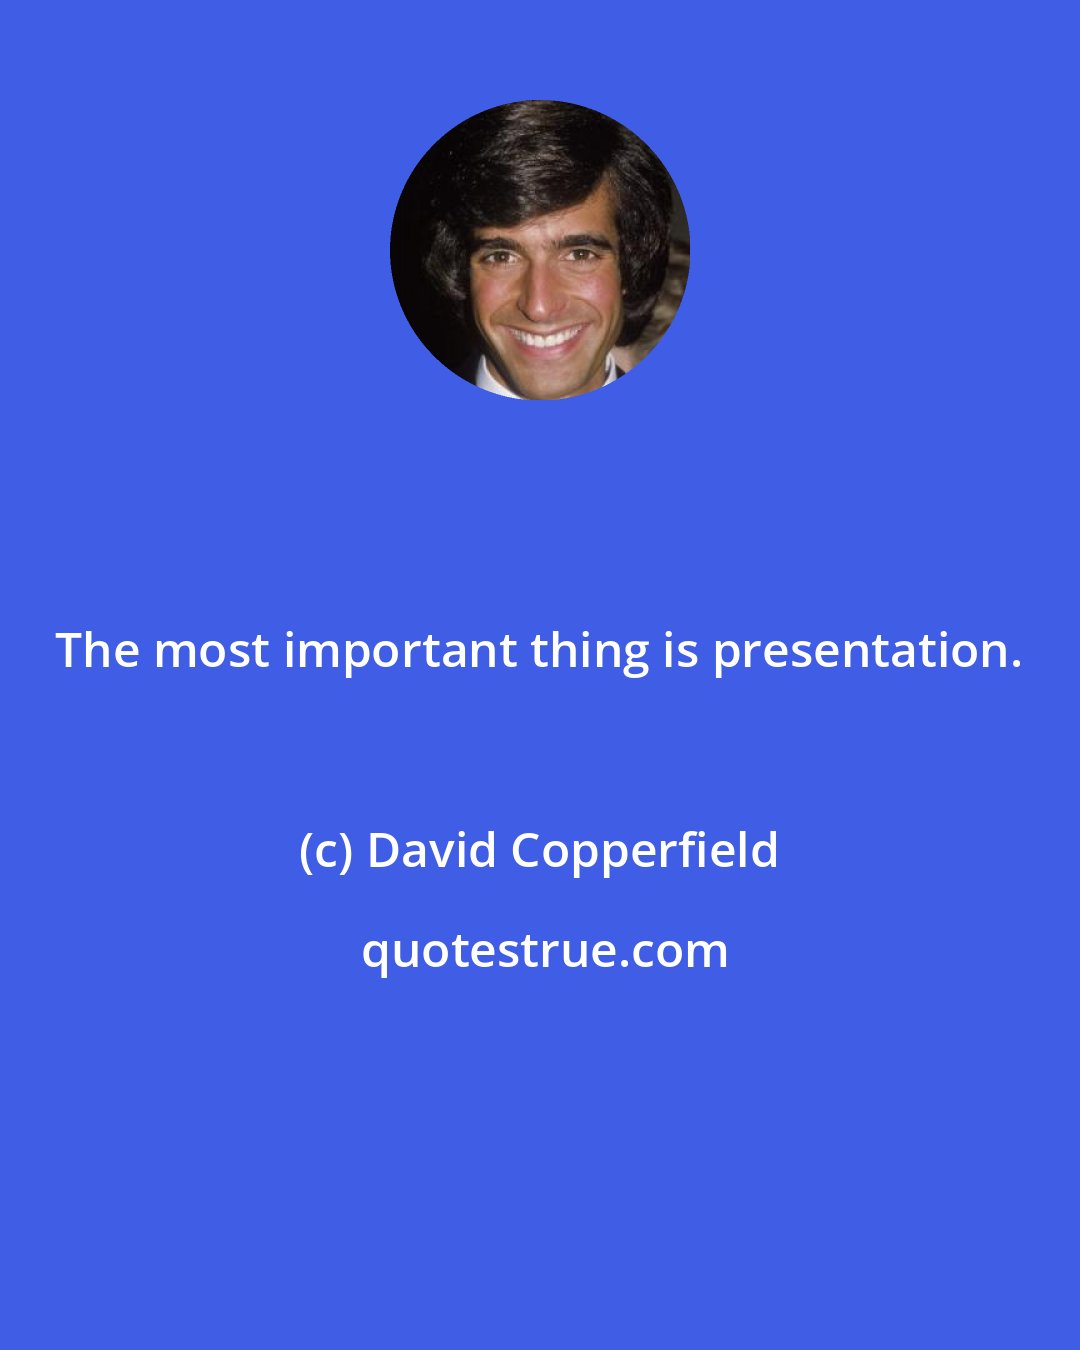 David Copperfield: The most important thing is presentation.